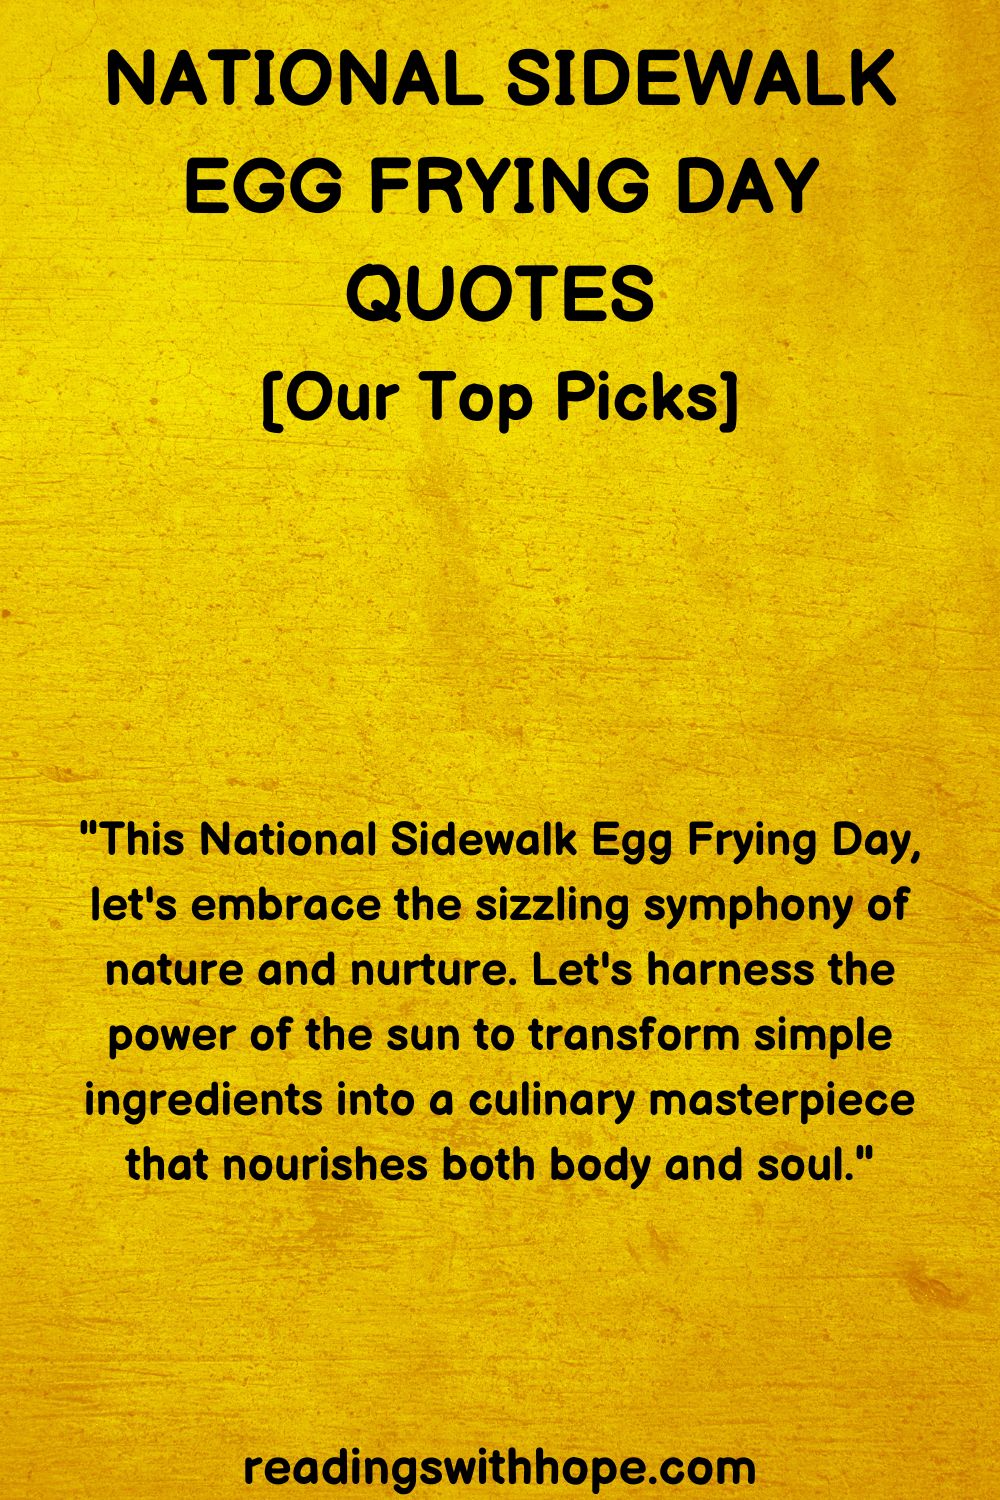 30 National Sidewalk Egg Frying Day Quotes and Messages